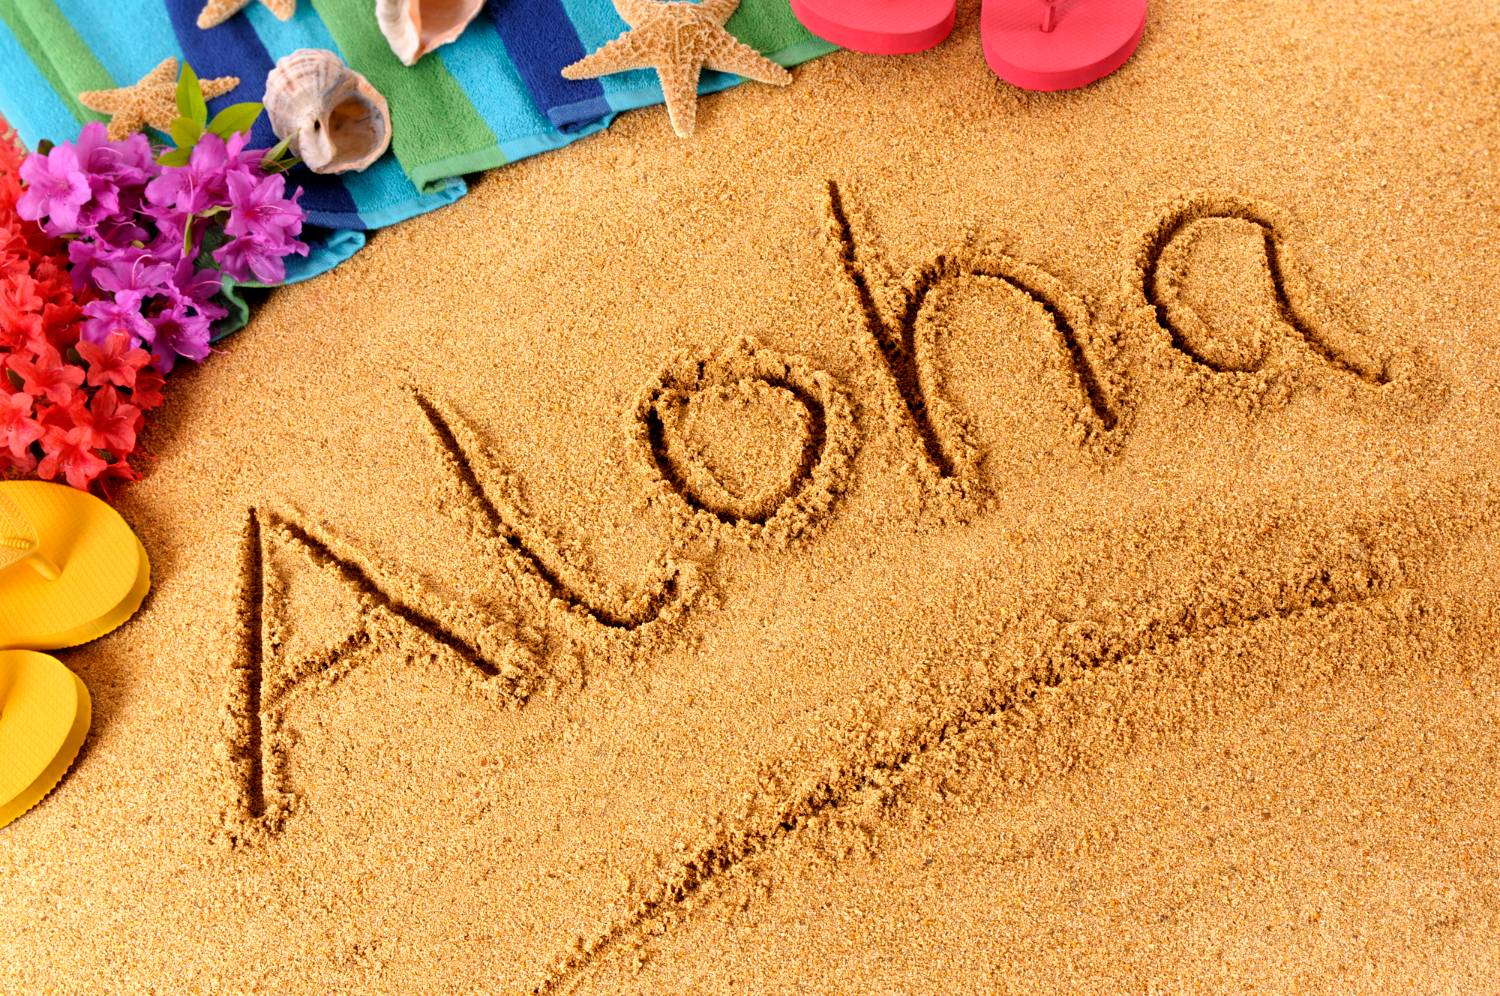 "Aloha" written in sand with flowers and flip-flops, from Ultimate Pontoon Guide.